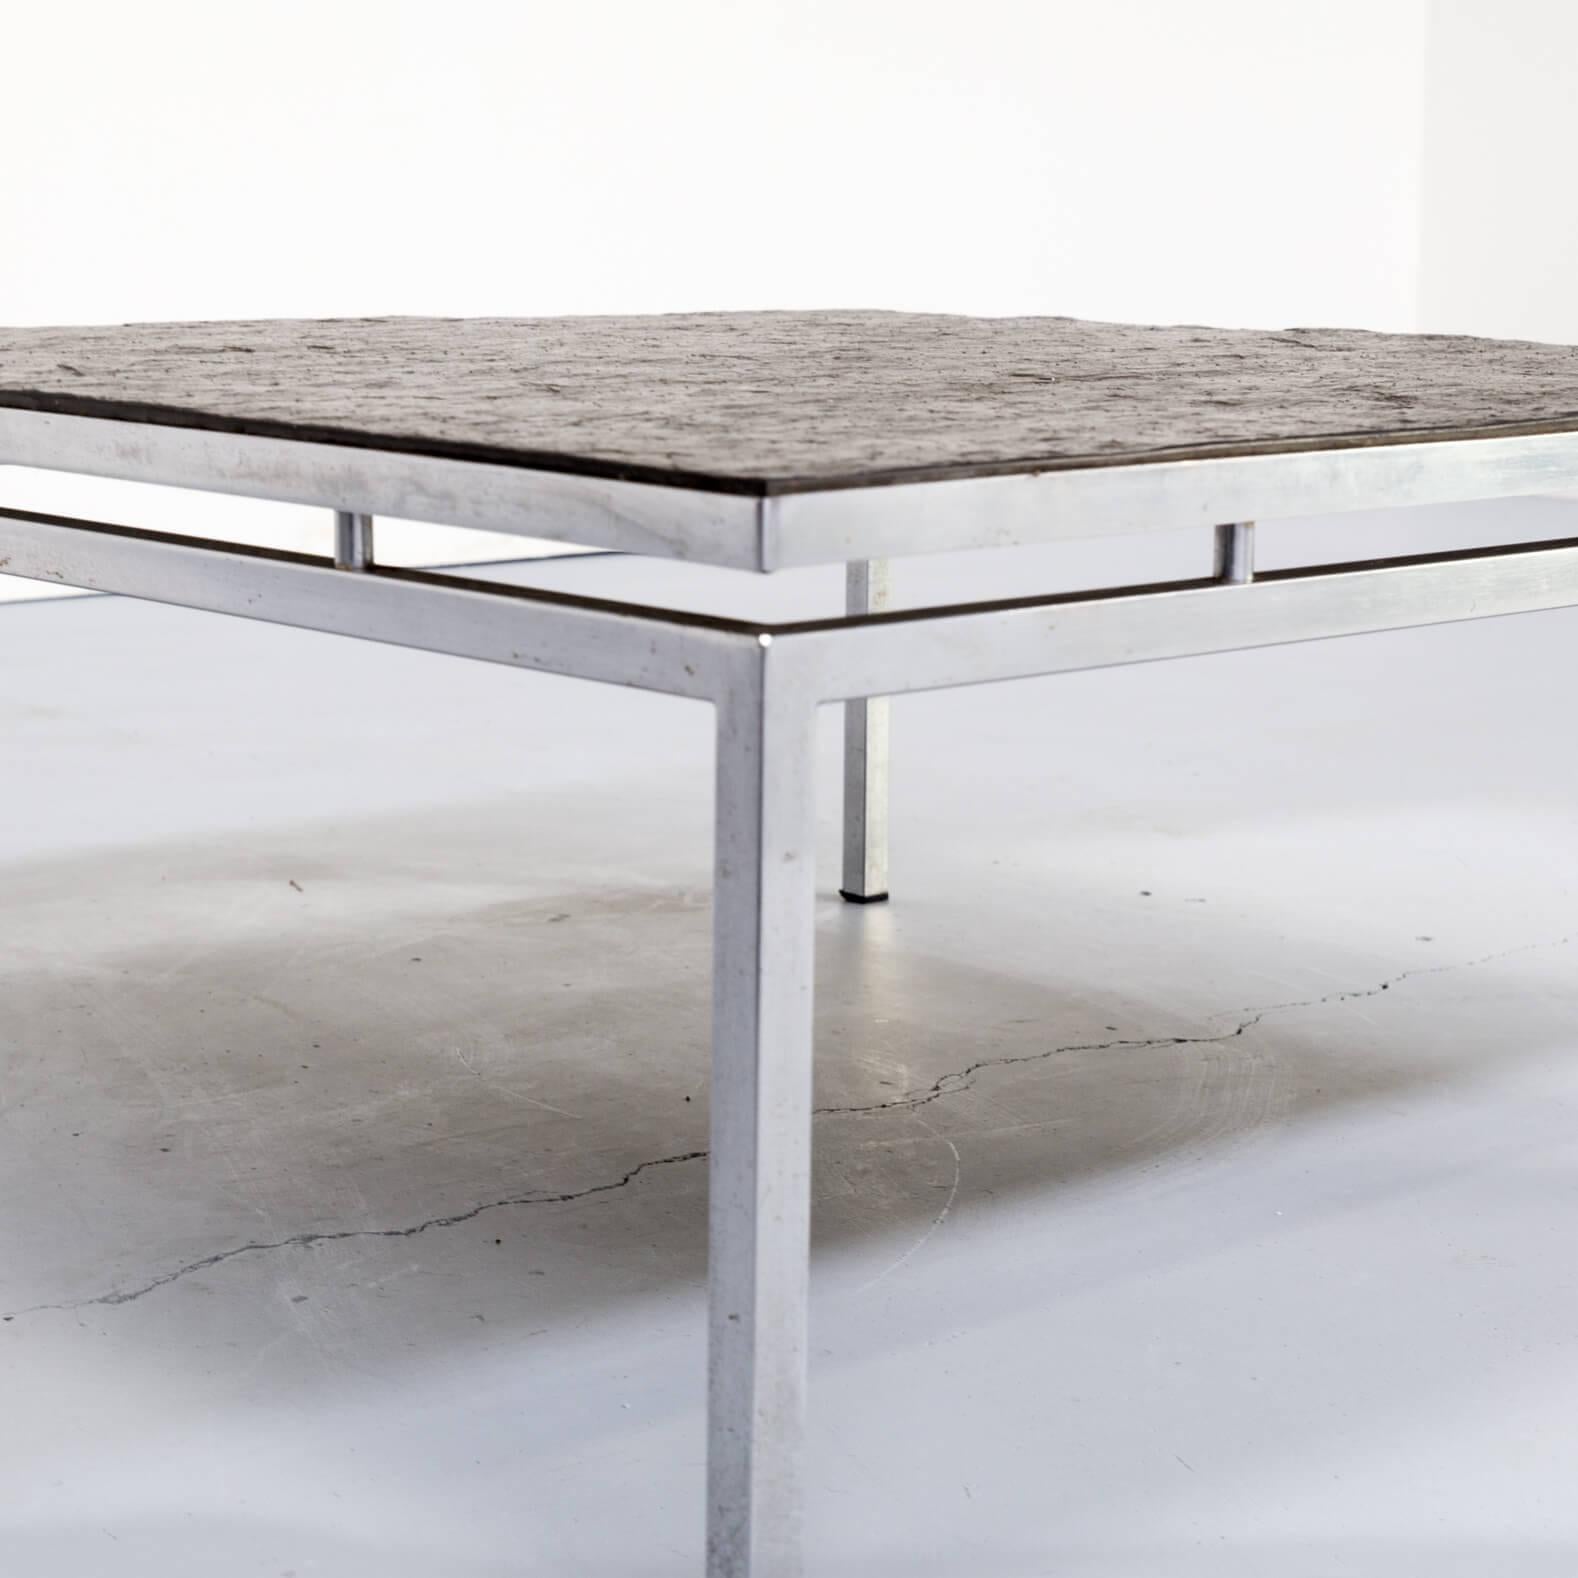 1980s Square Chromed Metal Framed Coffee Table with Slate Worktop For Sale 2